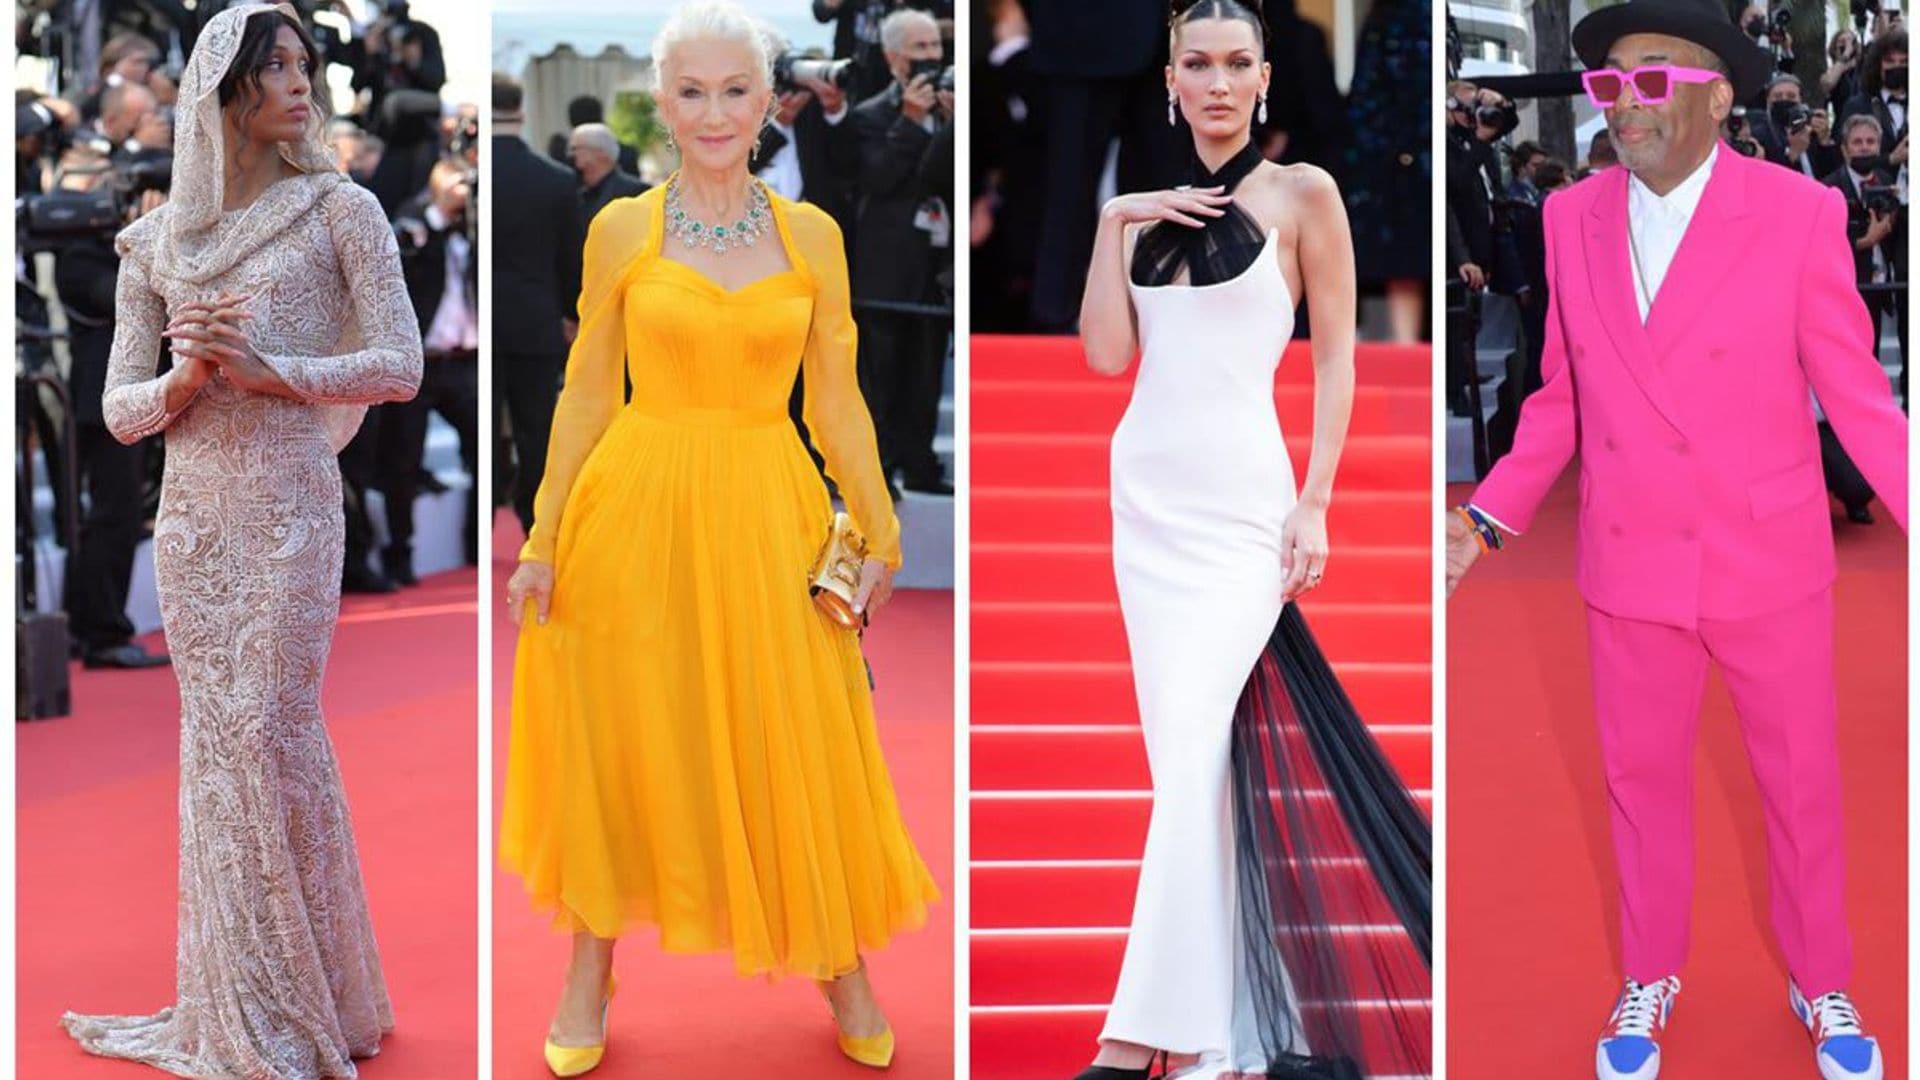 Cannes Film Festival 2021: jaw-dropping looks from the red carpet